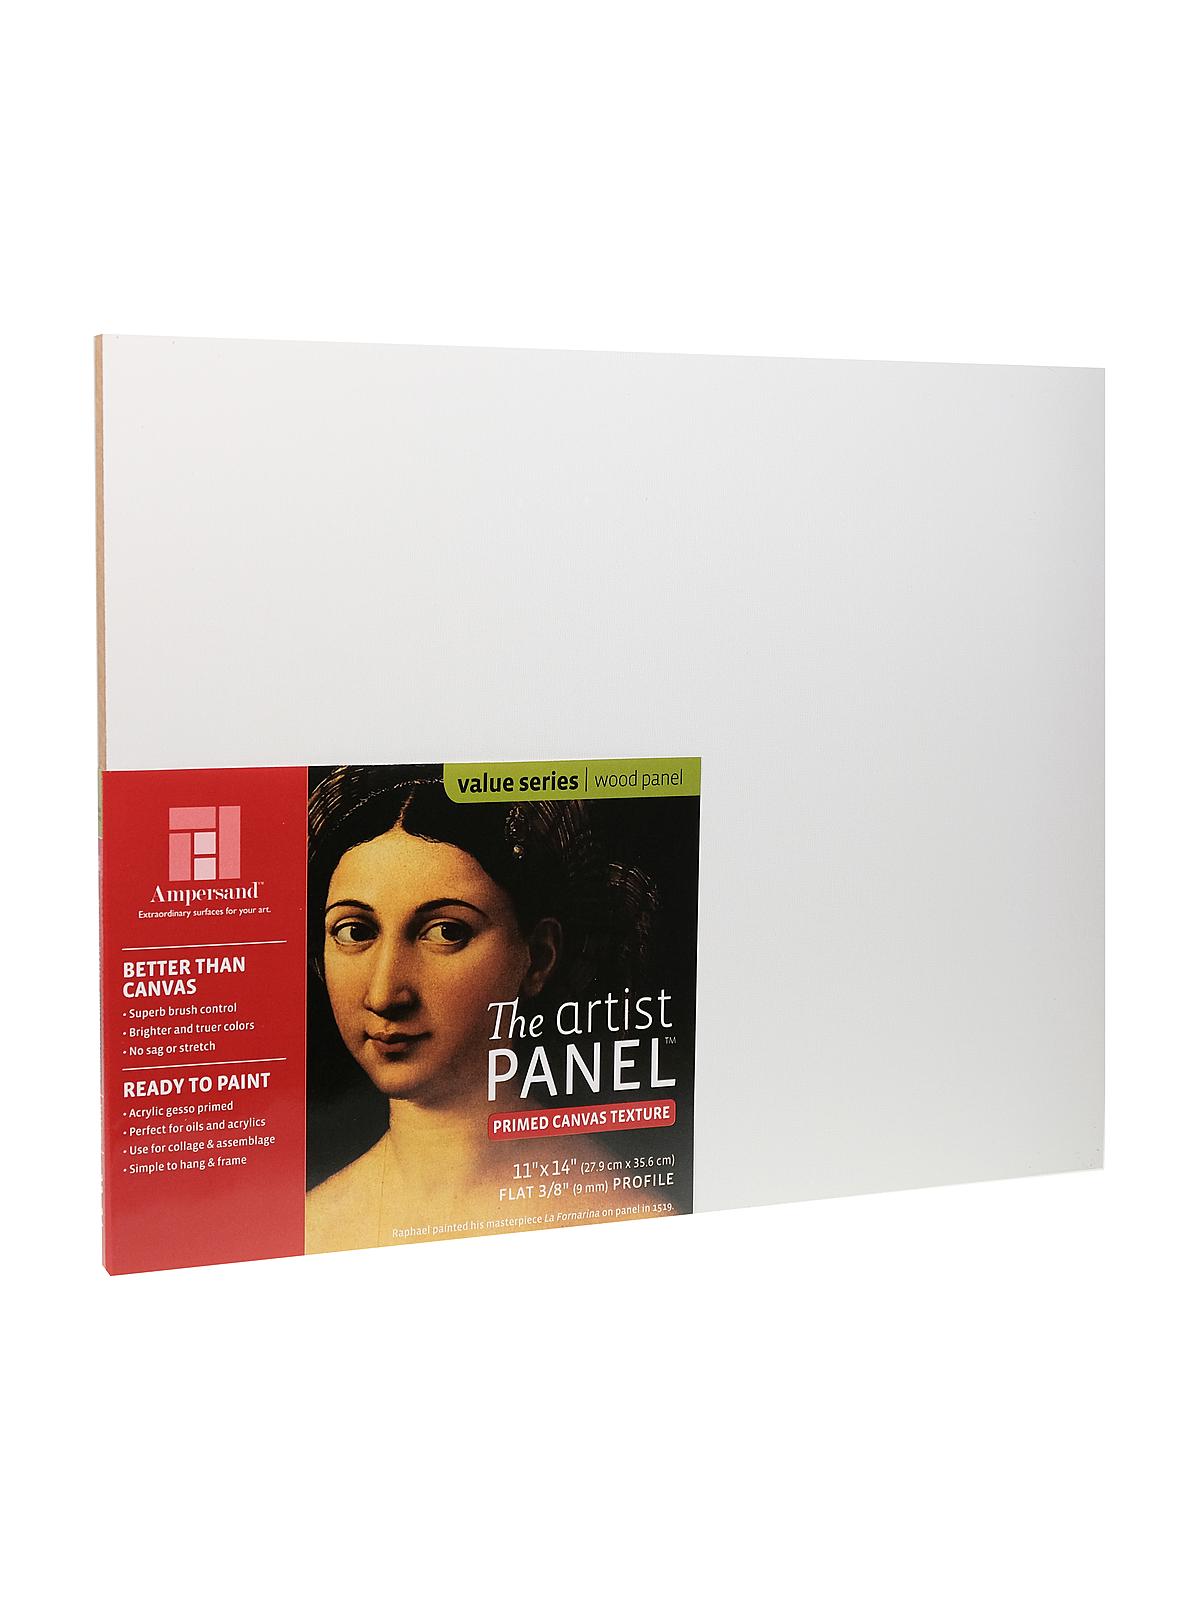 The Artist Panel Canvas Texture Flat Profile 11 In. X 14 In. 3 8 In.